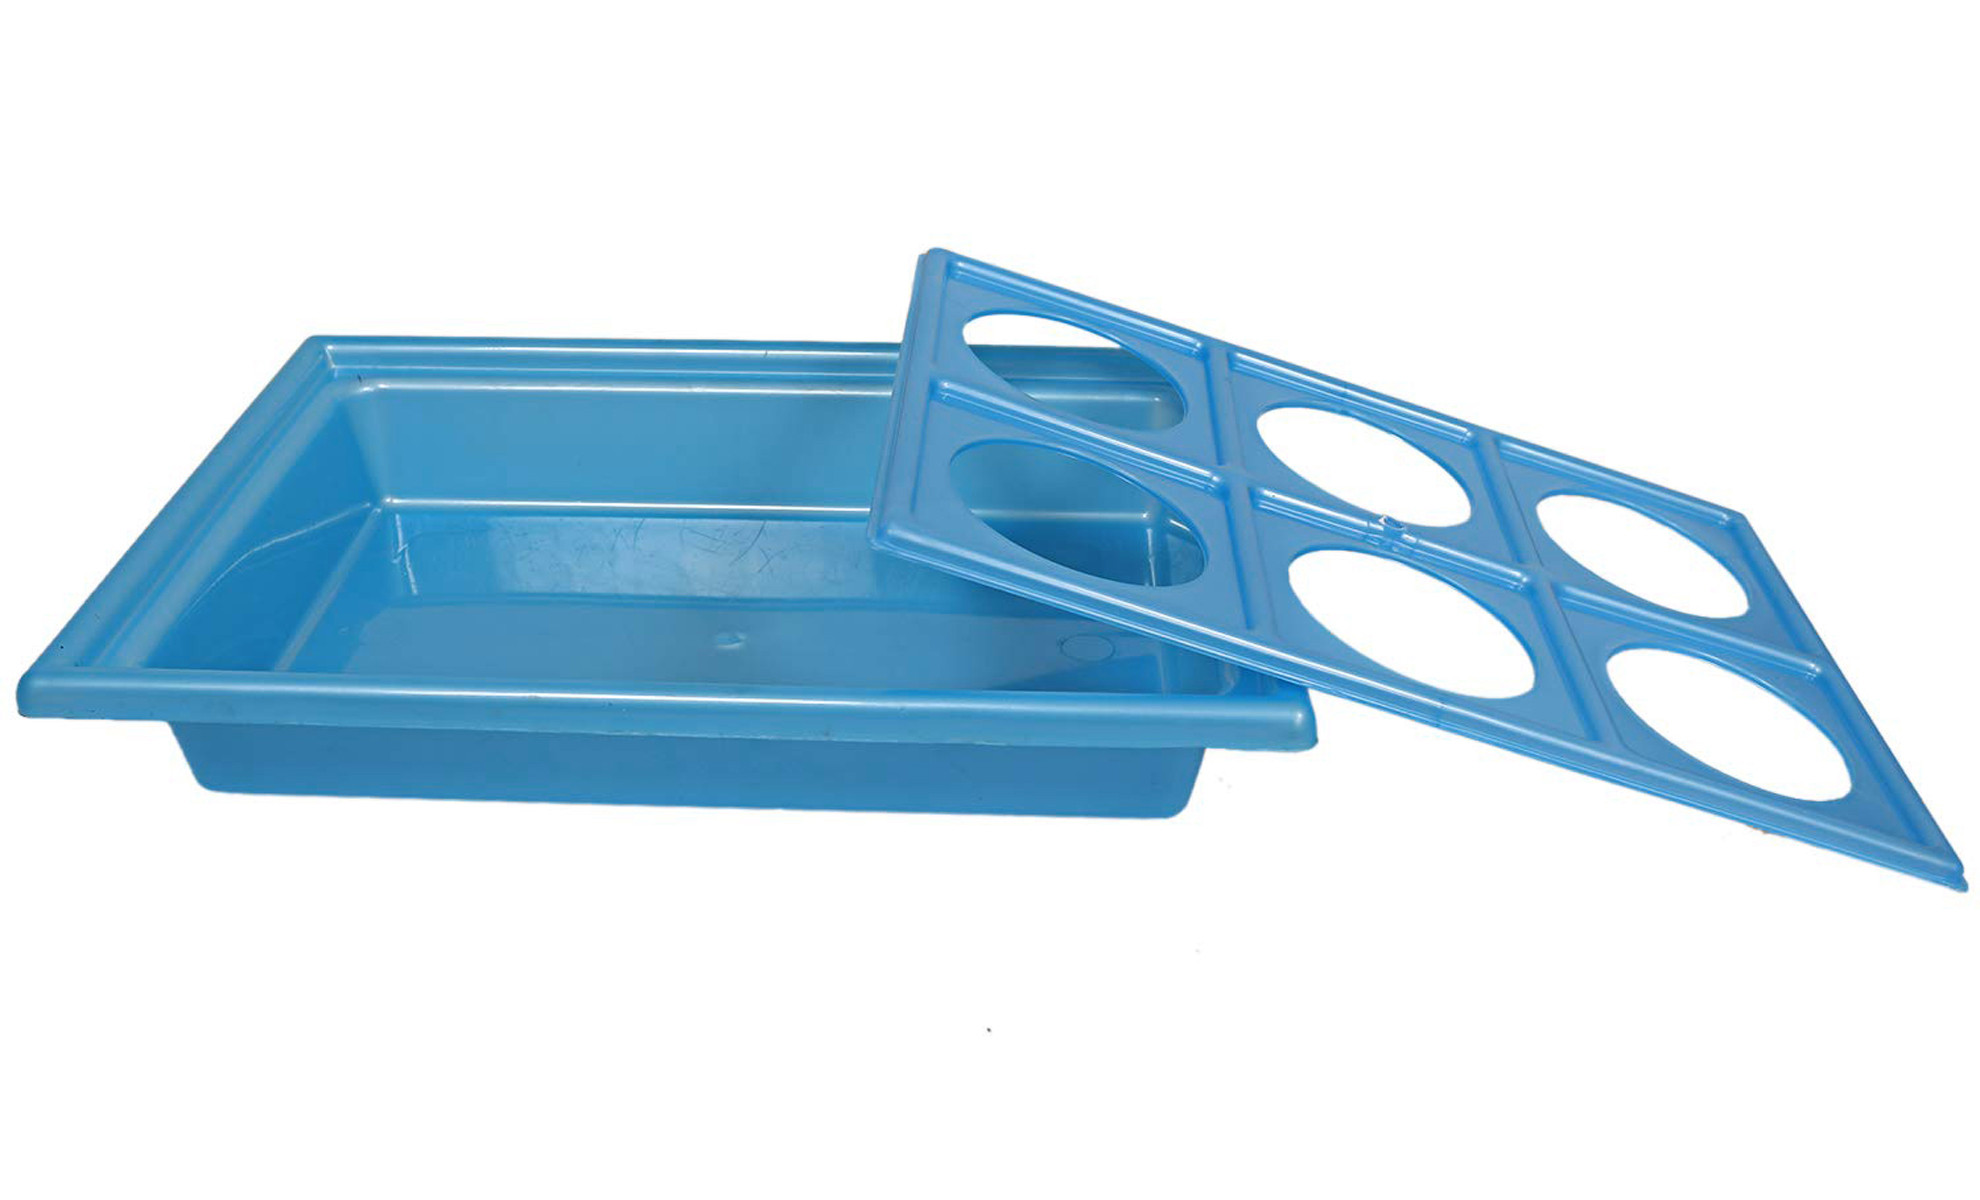 Kuber Industries Tray with Cutout Handles, Cup Display for Kitchenware, Plastic Glass Holder, One Size, 6 Slots (Blue)